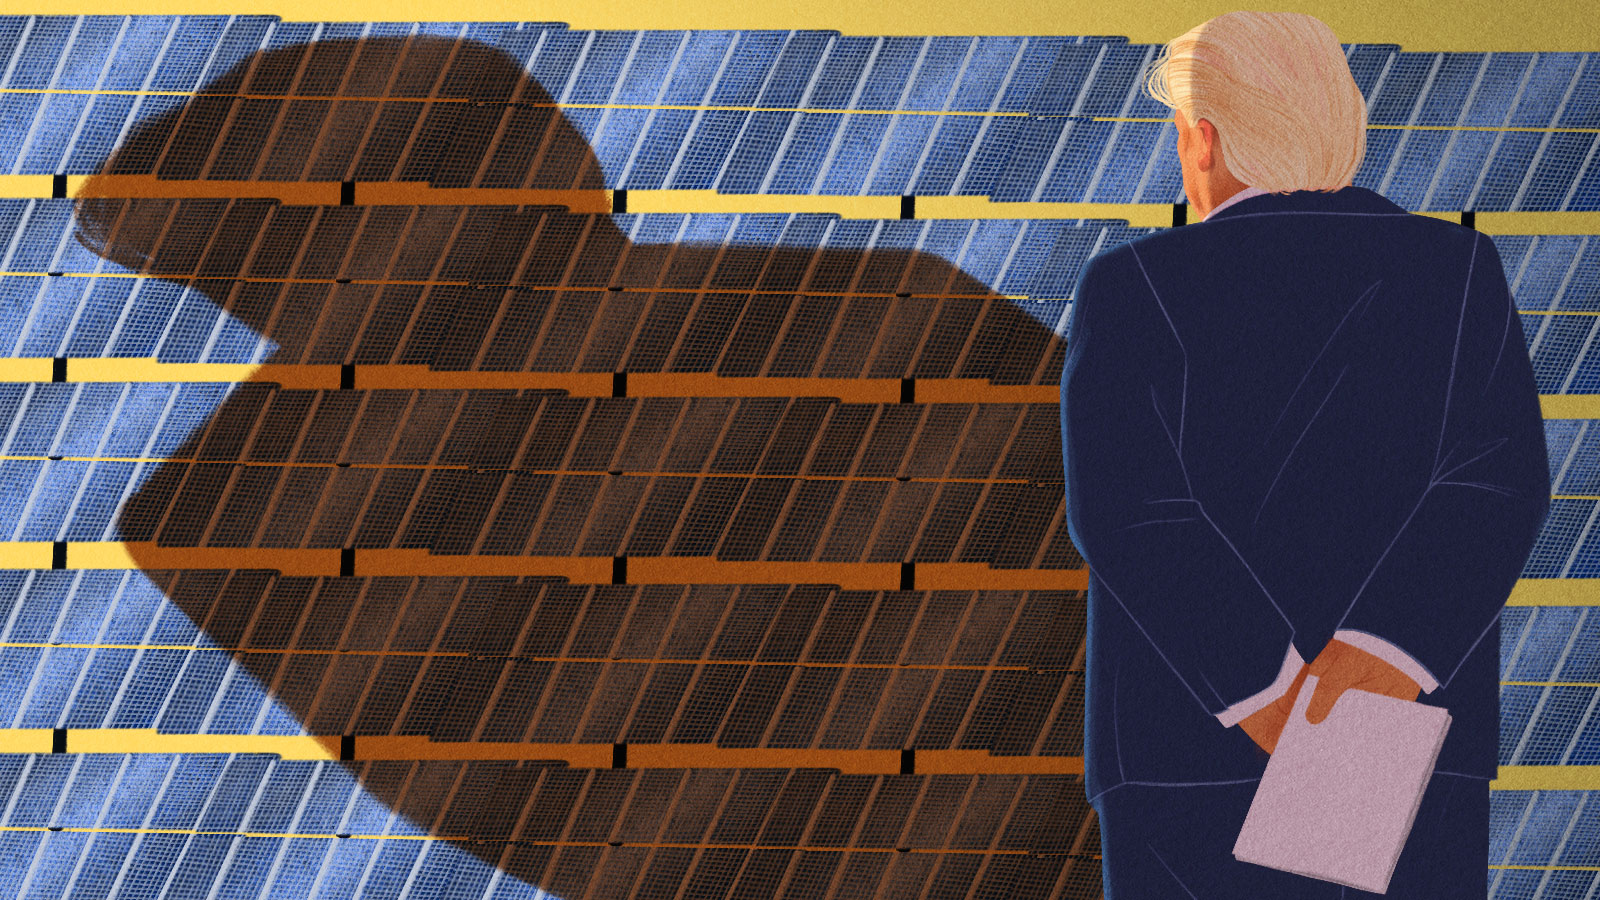 Illustration depicting President Trump looming over a field of solar panels, casting a large orange shadow, while holding papers behind his back.